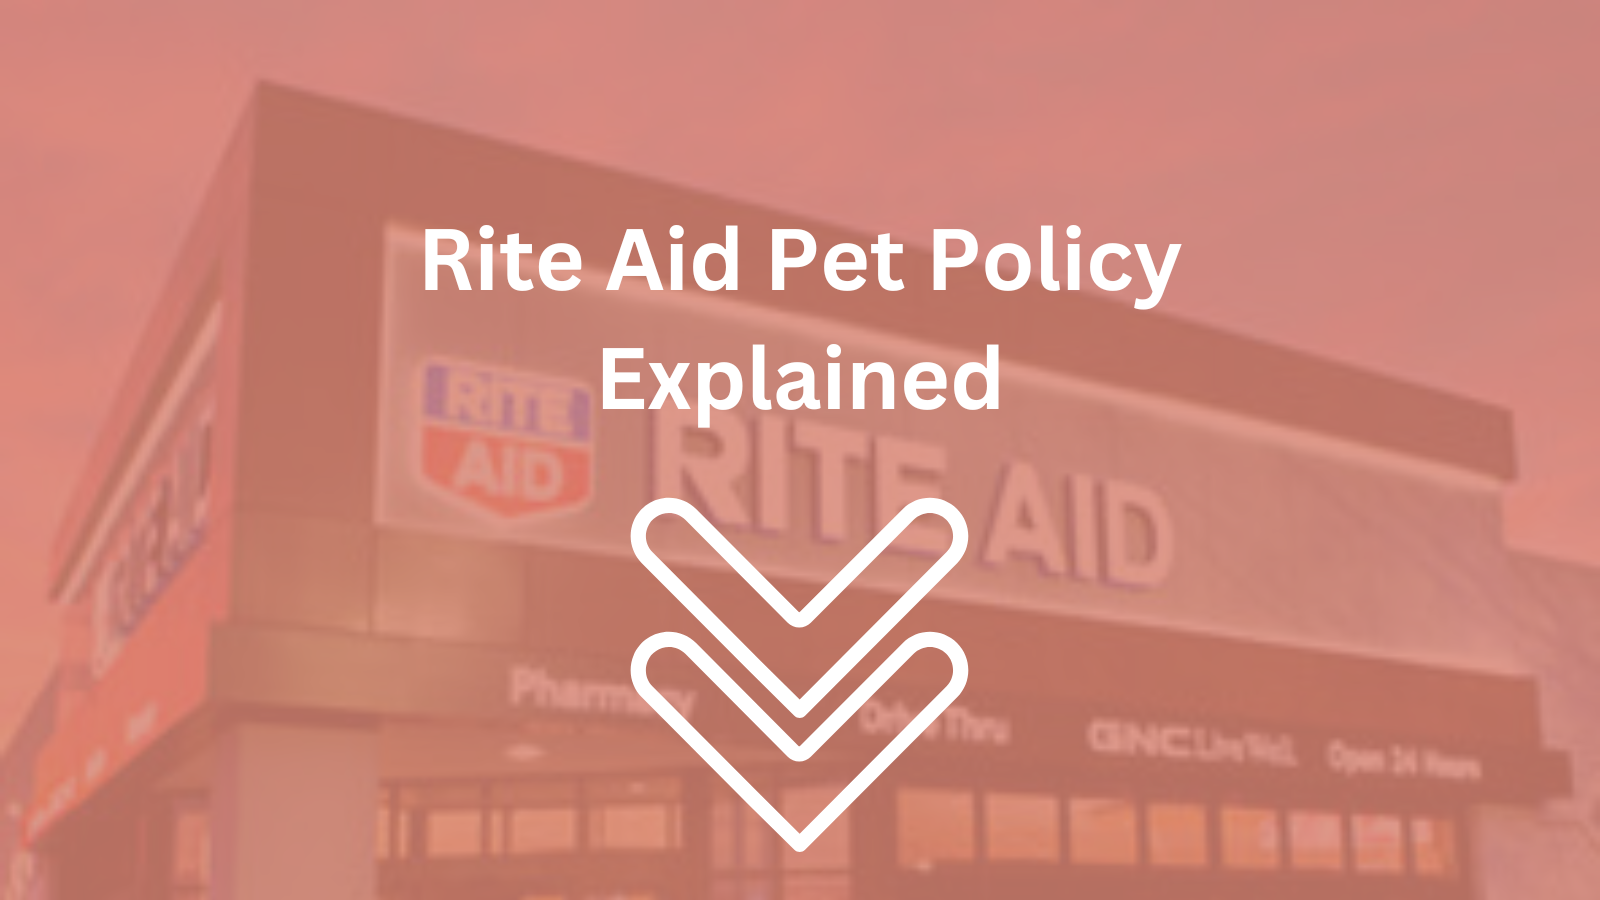 Image Text: "Rite Aid Pet Policy Explained"